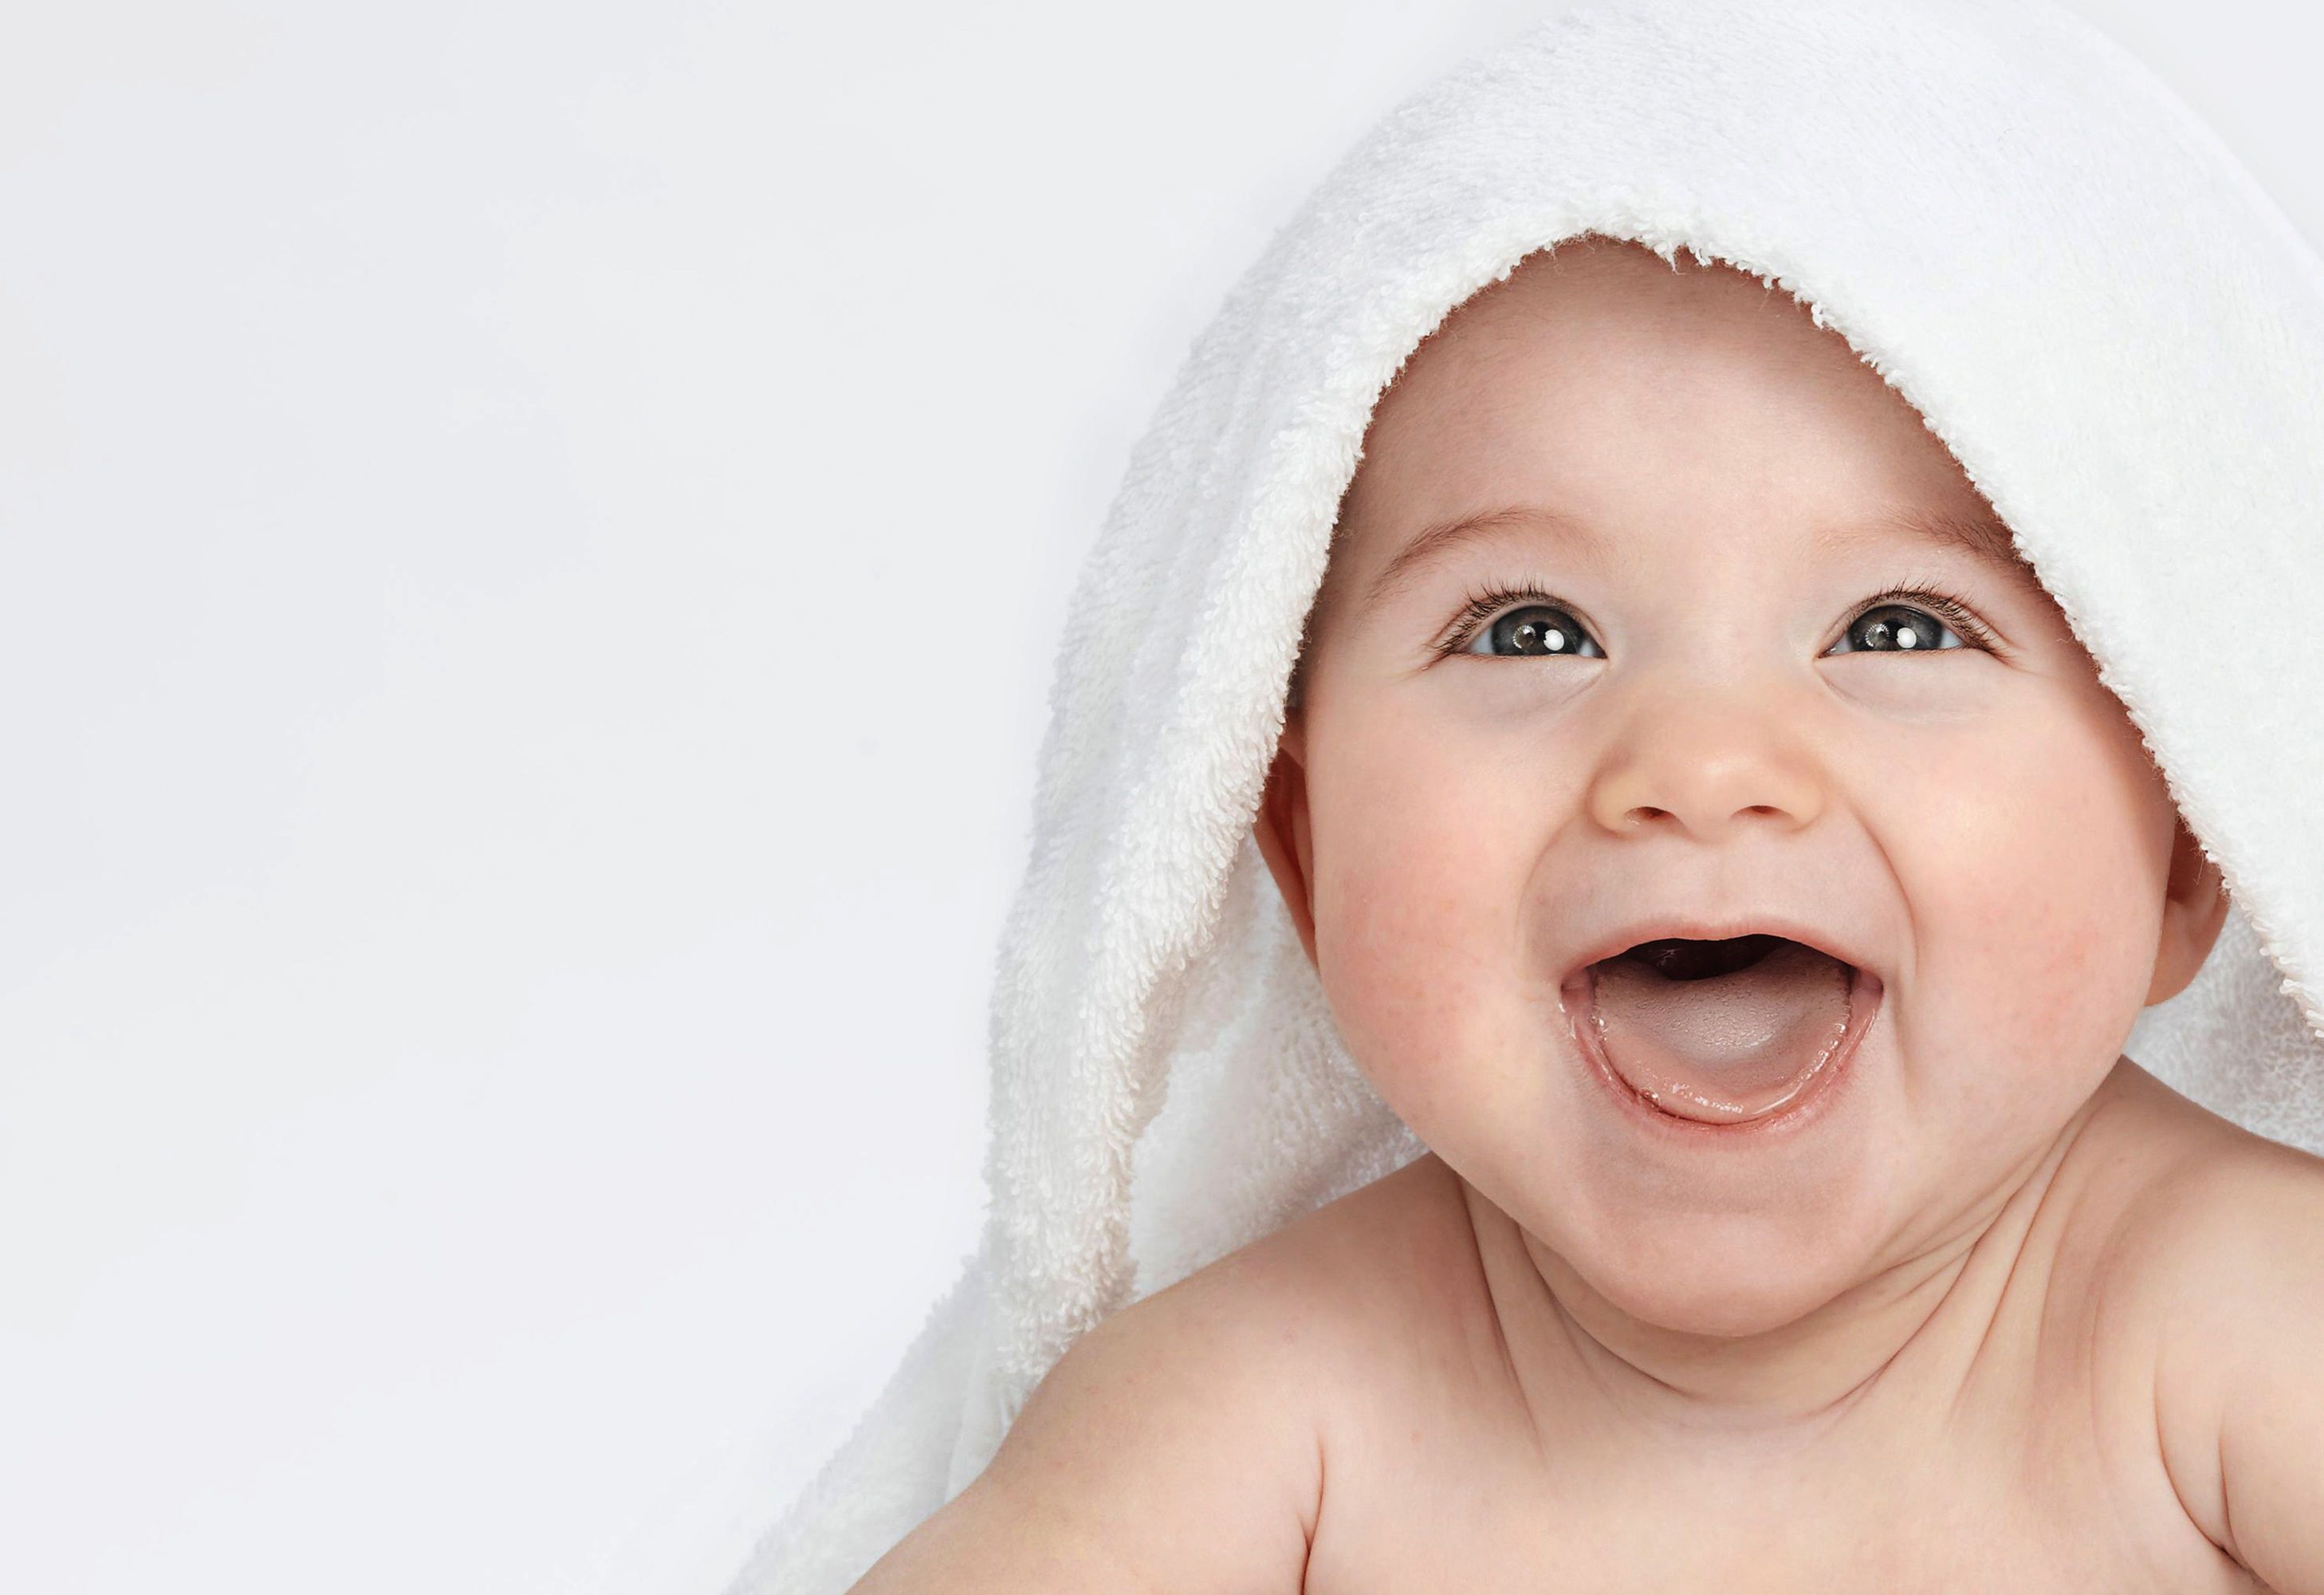 laughing baby pictures